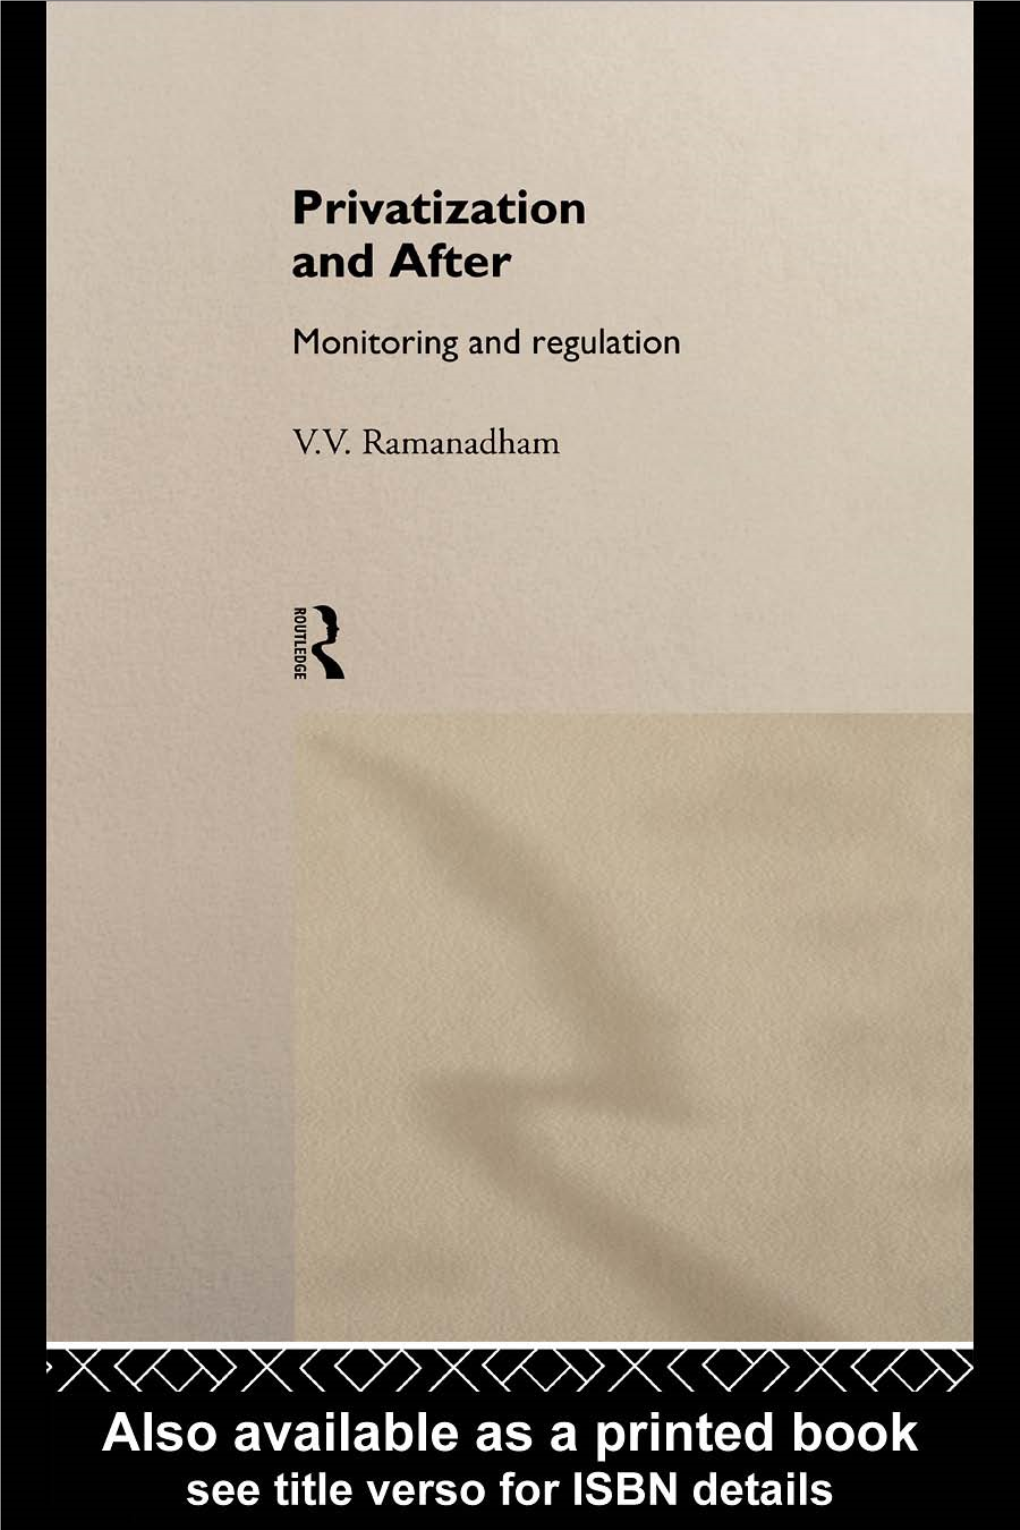 Privatization and After: Monitoring and Regulation/Edited by V.V.Ramanadham